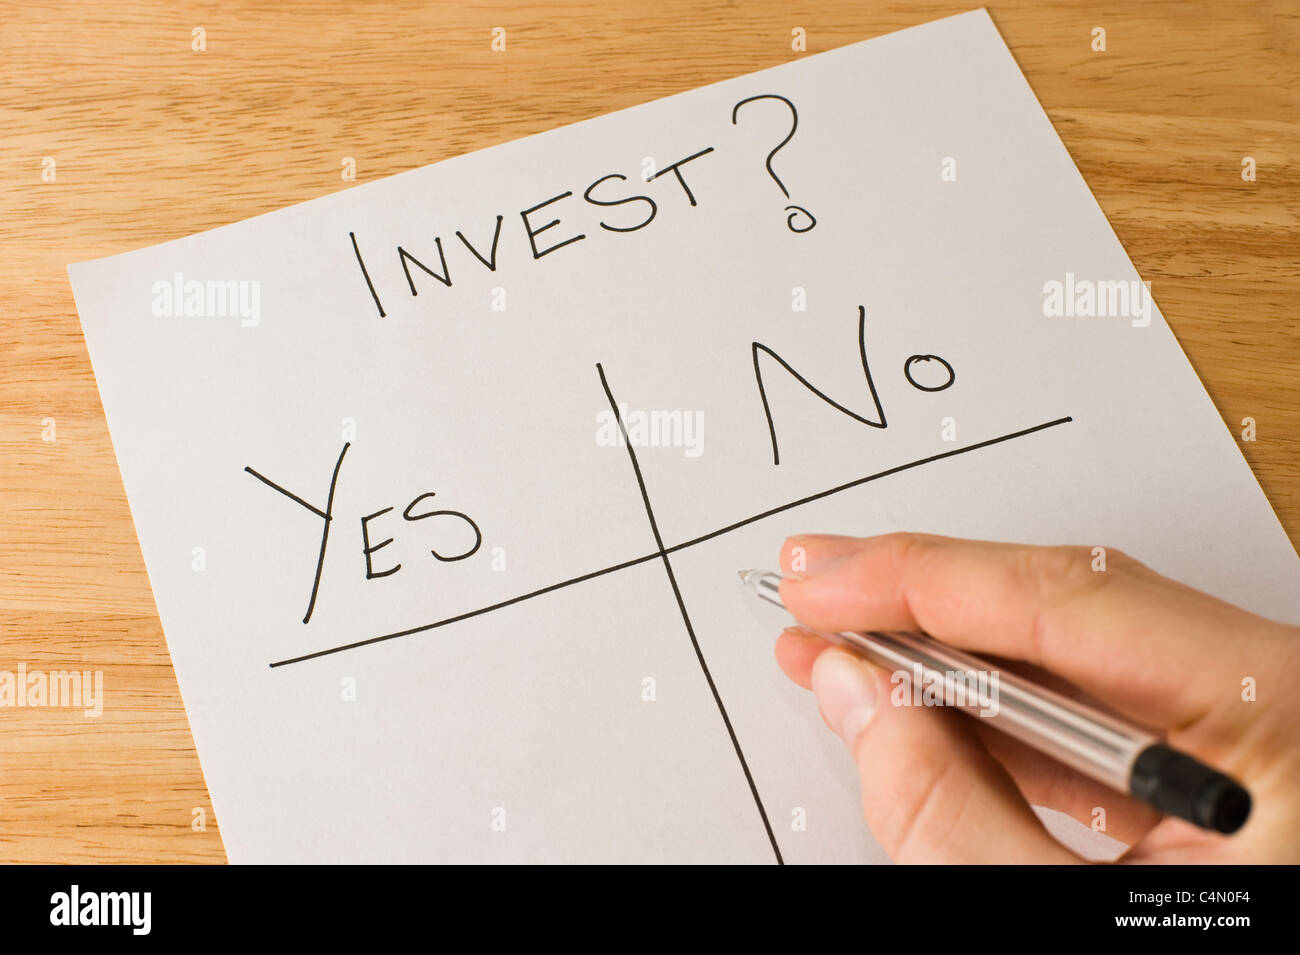 Business man making the decision of whether or not to invest Stock Photo